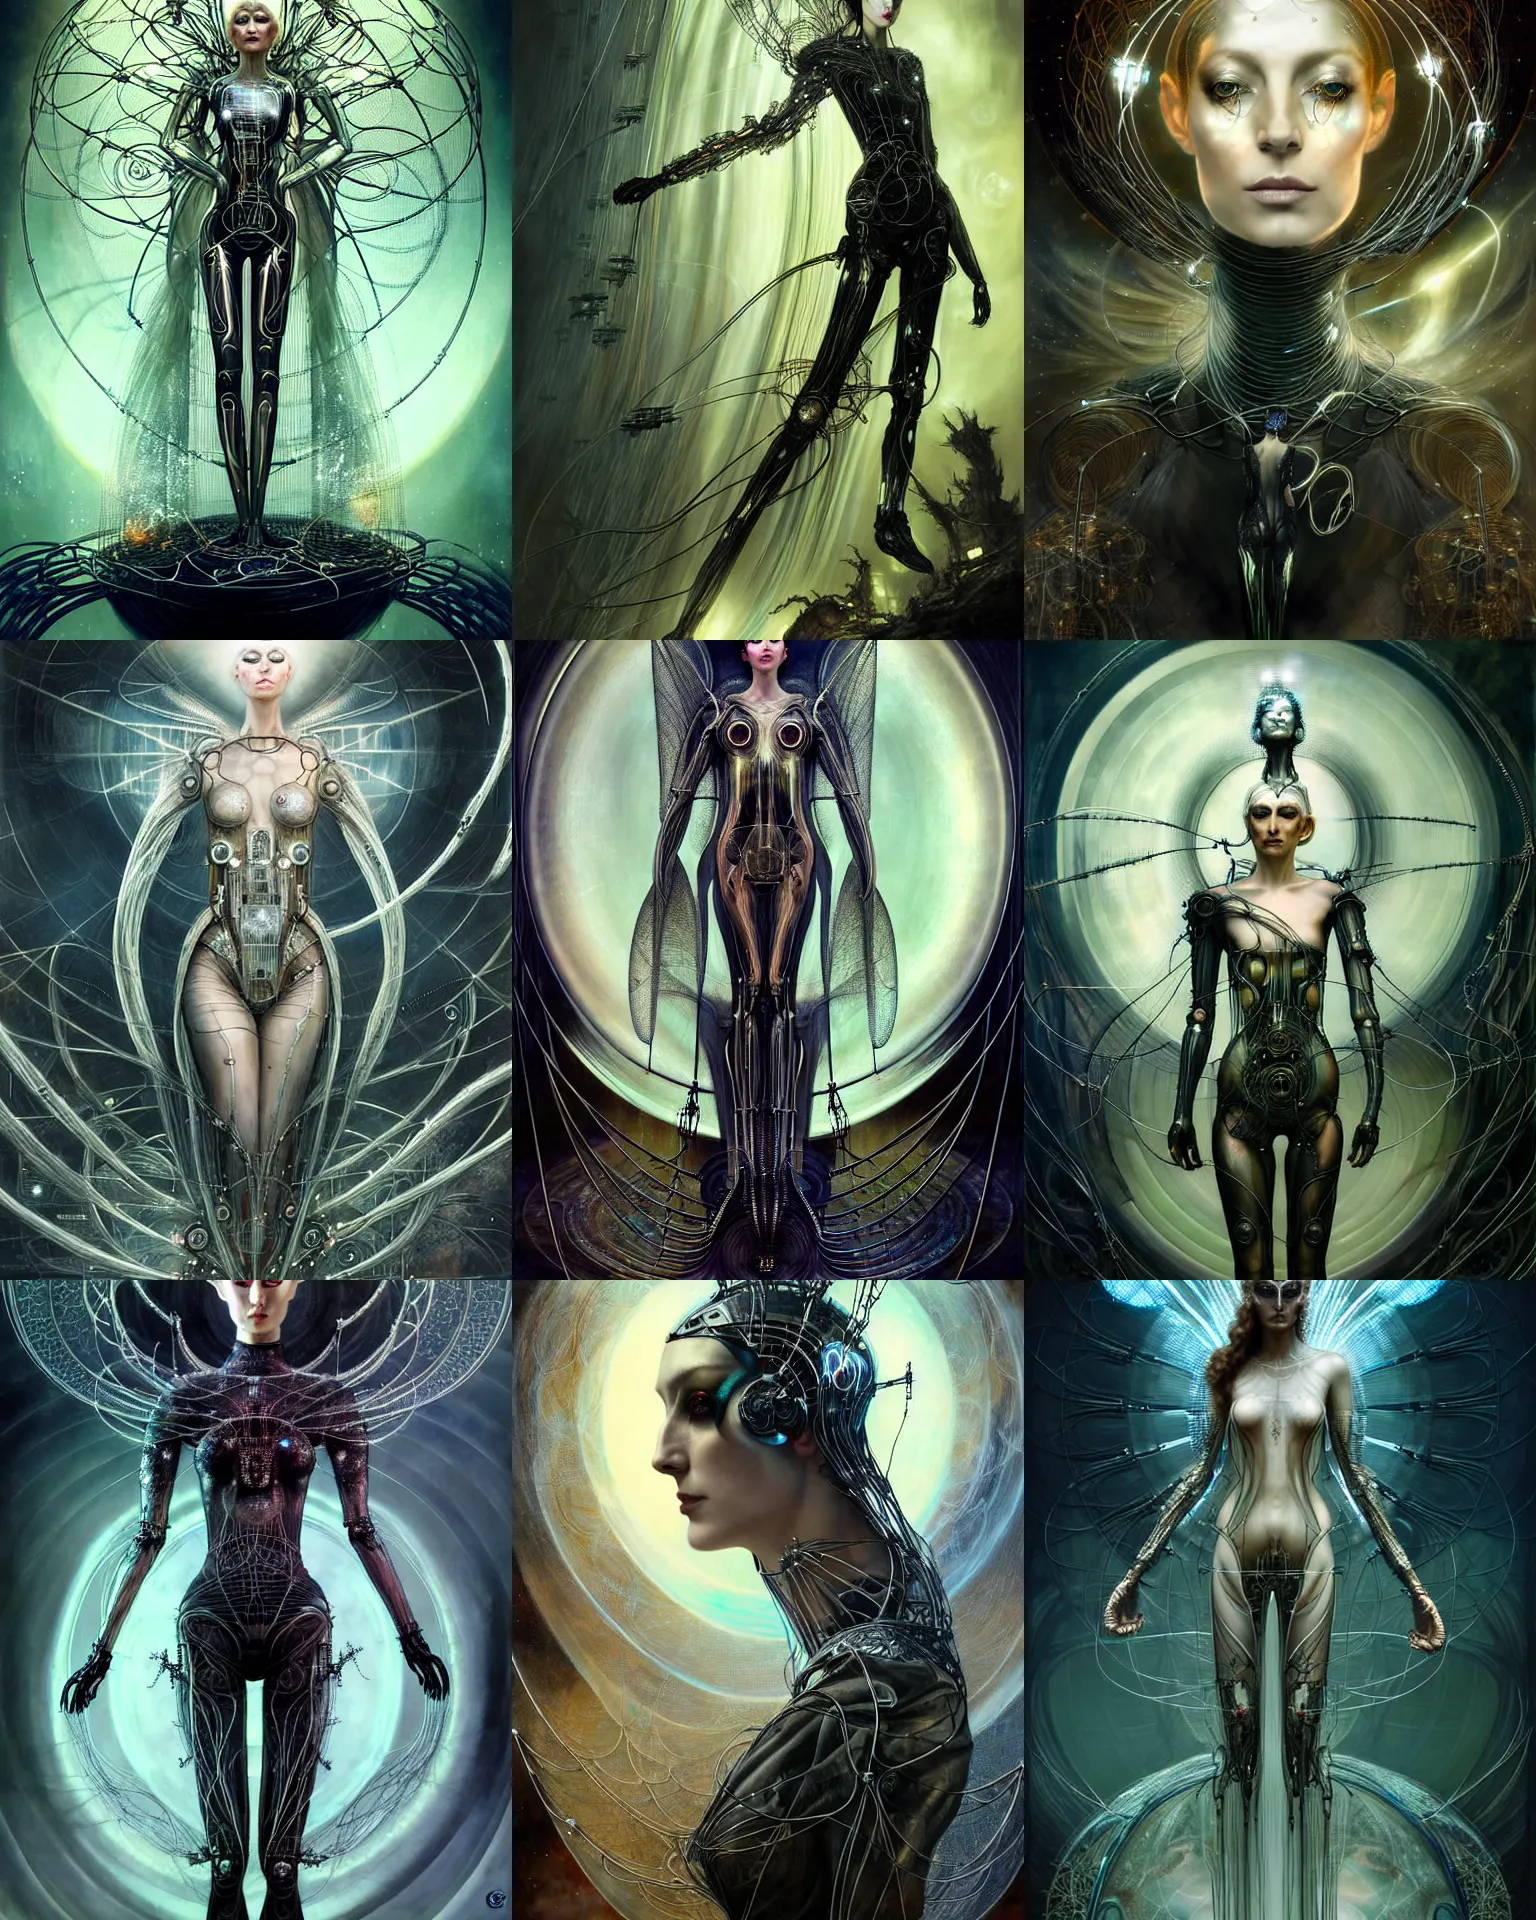 Prompt: karol bak and tom bagshaw and bastien lecouffe - deharme full body character portrait of galadriel as the borg queen, glitchcore rebirth, floating in a powerful zen state, supermodel, beautiful and ominous, wearing combination of mecha and bodysuit made of wires and etched ceramic, machinery enveloping nature in the background, scifi character render